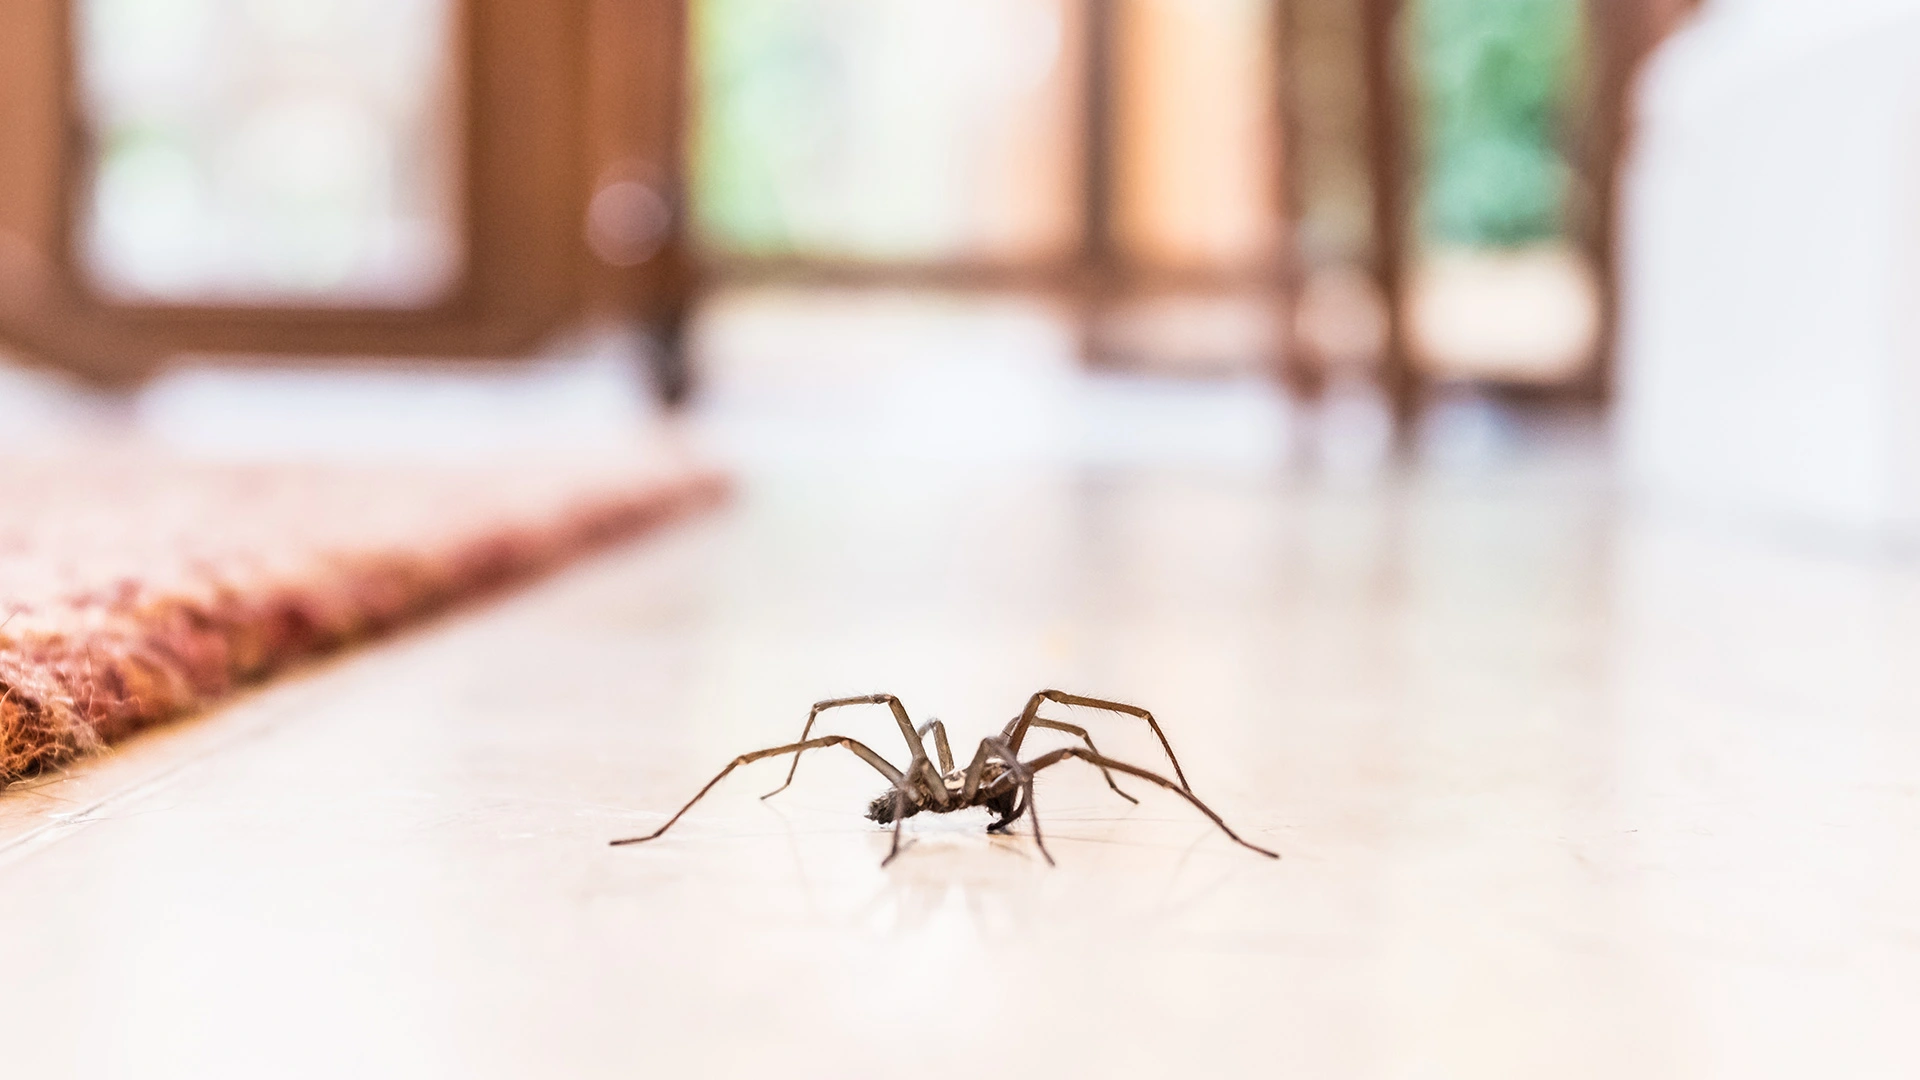 How to Keep Spiders Out of Your Home or Business